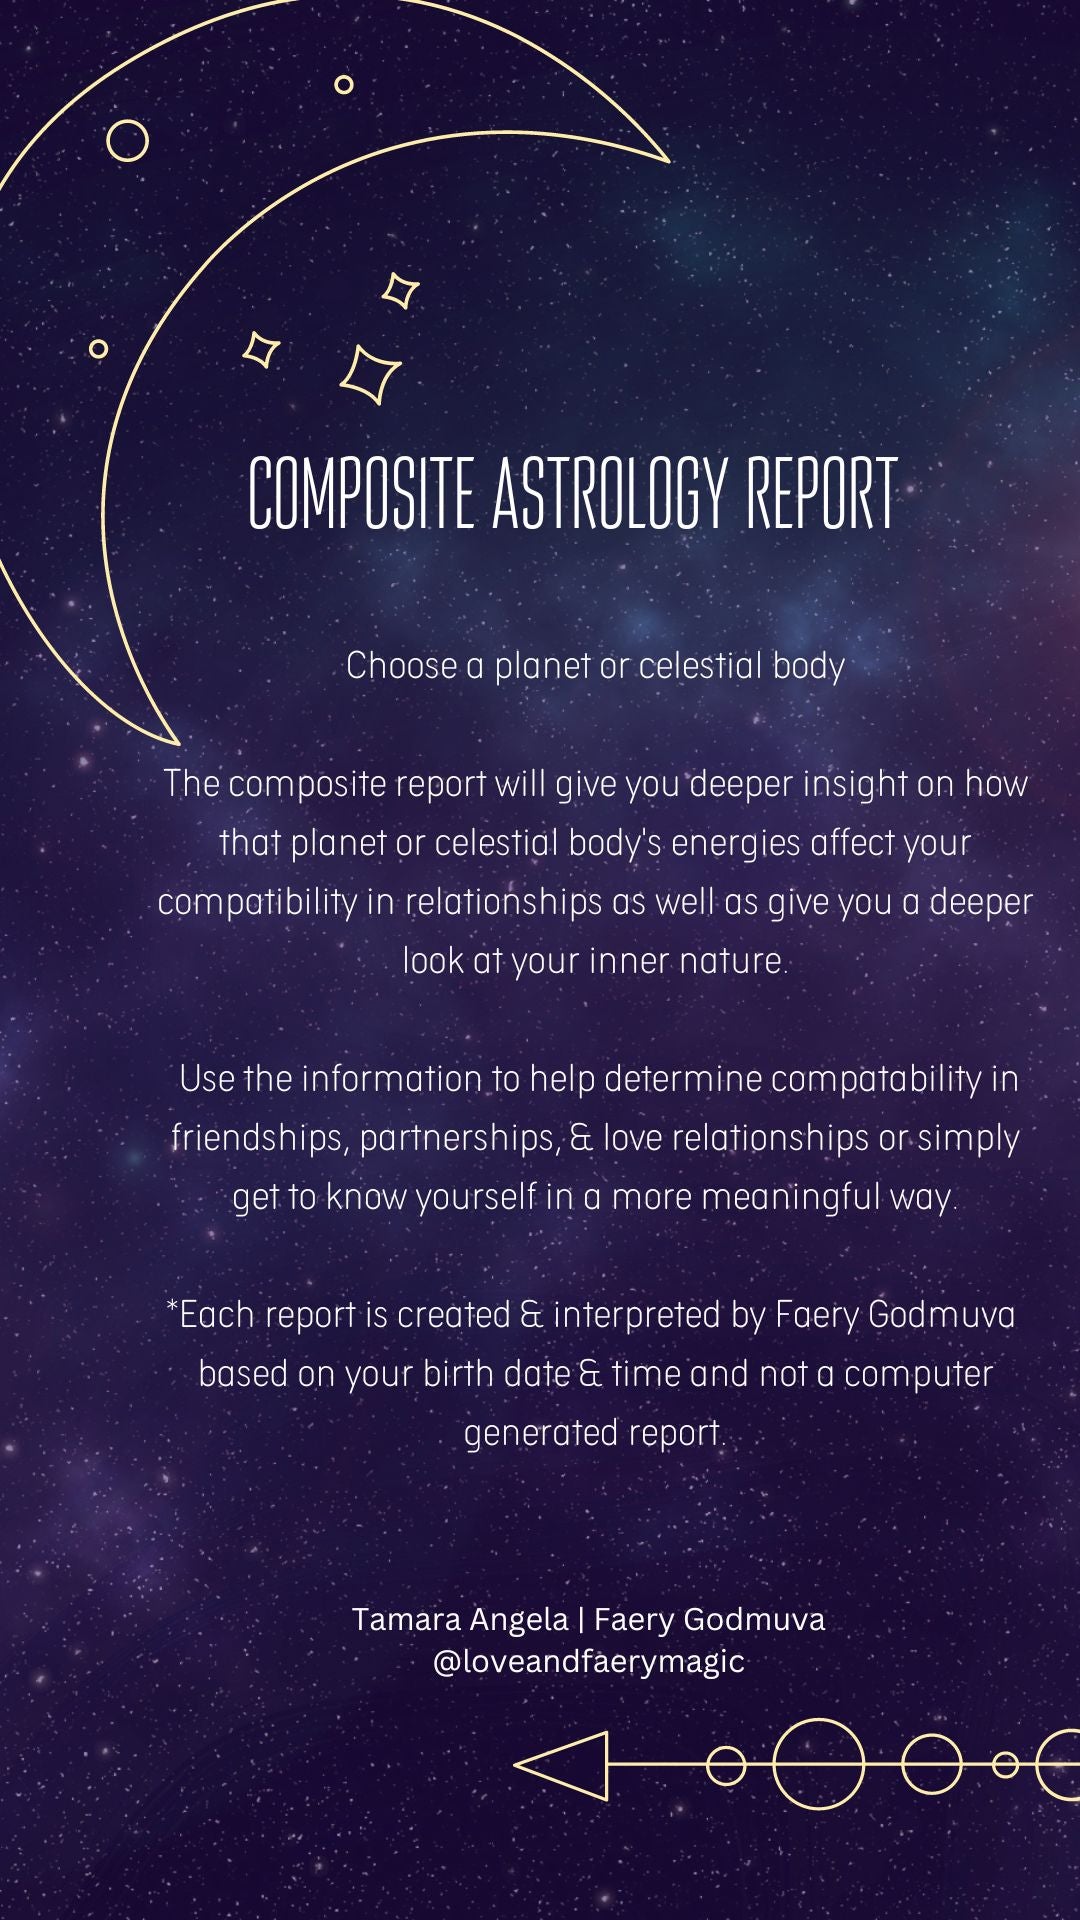 Composite Astrology Report